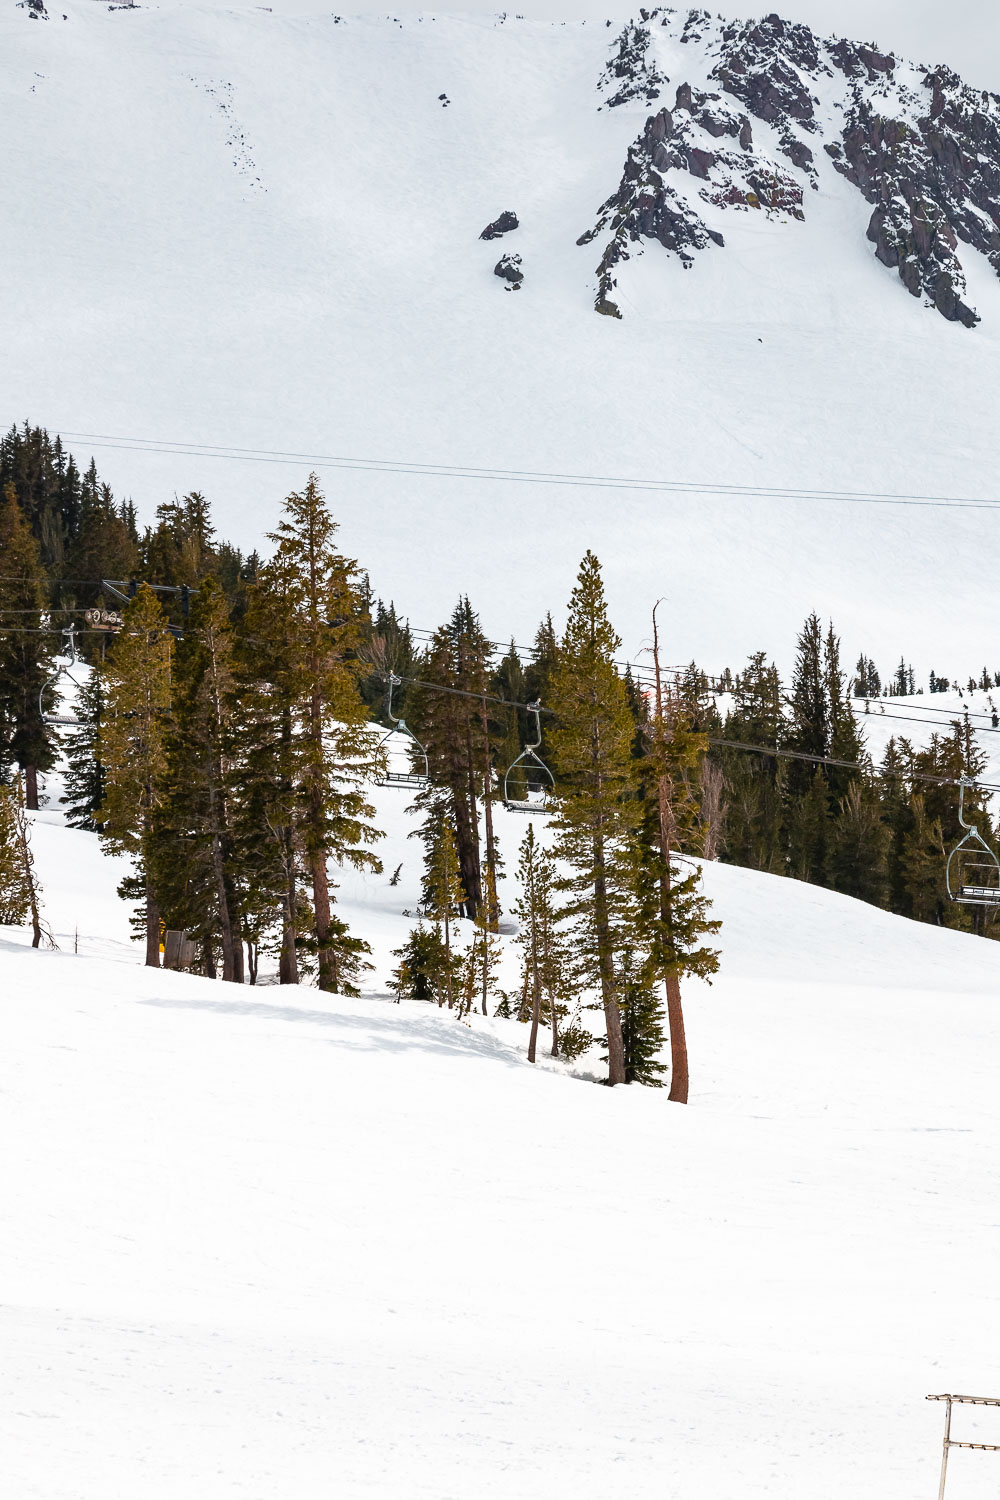 Places to find snow in California - Roads and Destinations, roadsanddestinations.com